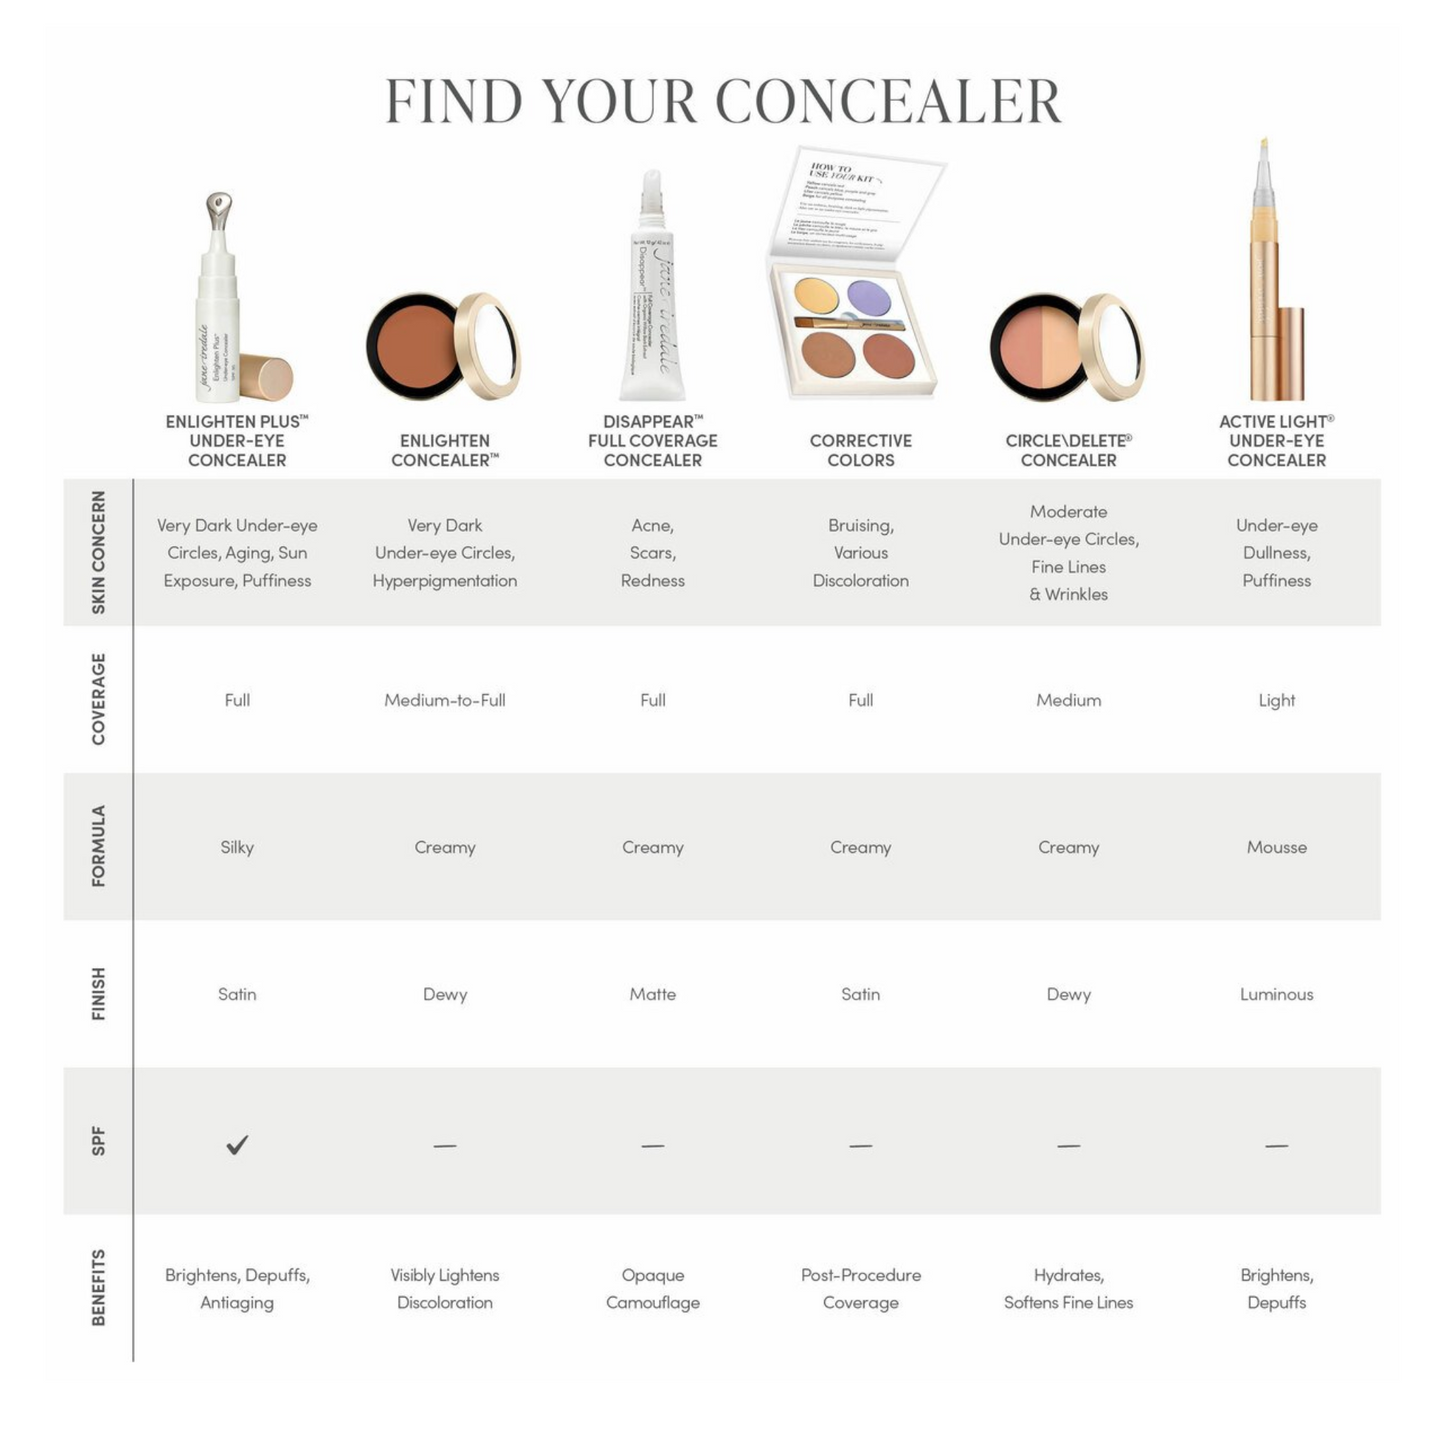 Jane Iredale Disappear Full-Coverage Concealer - Dark